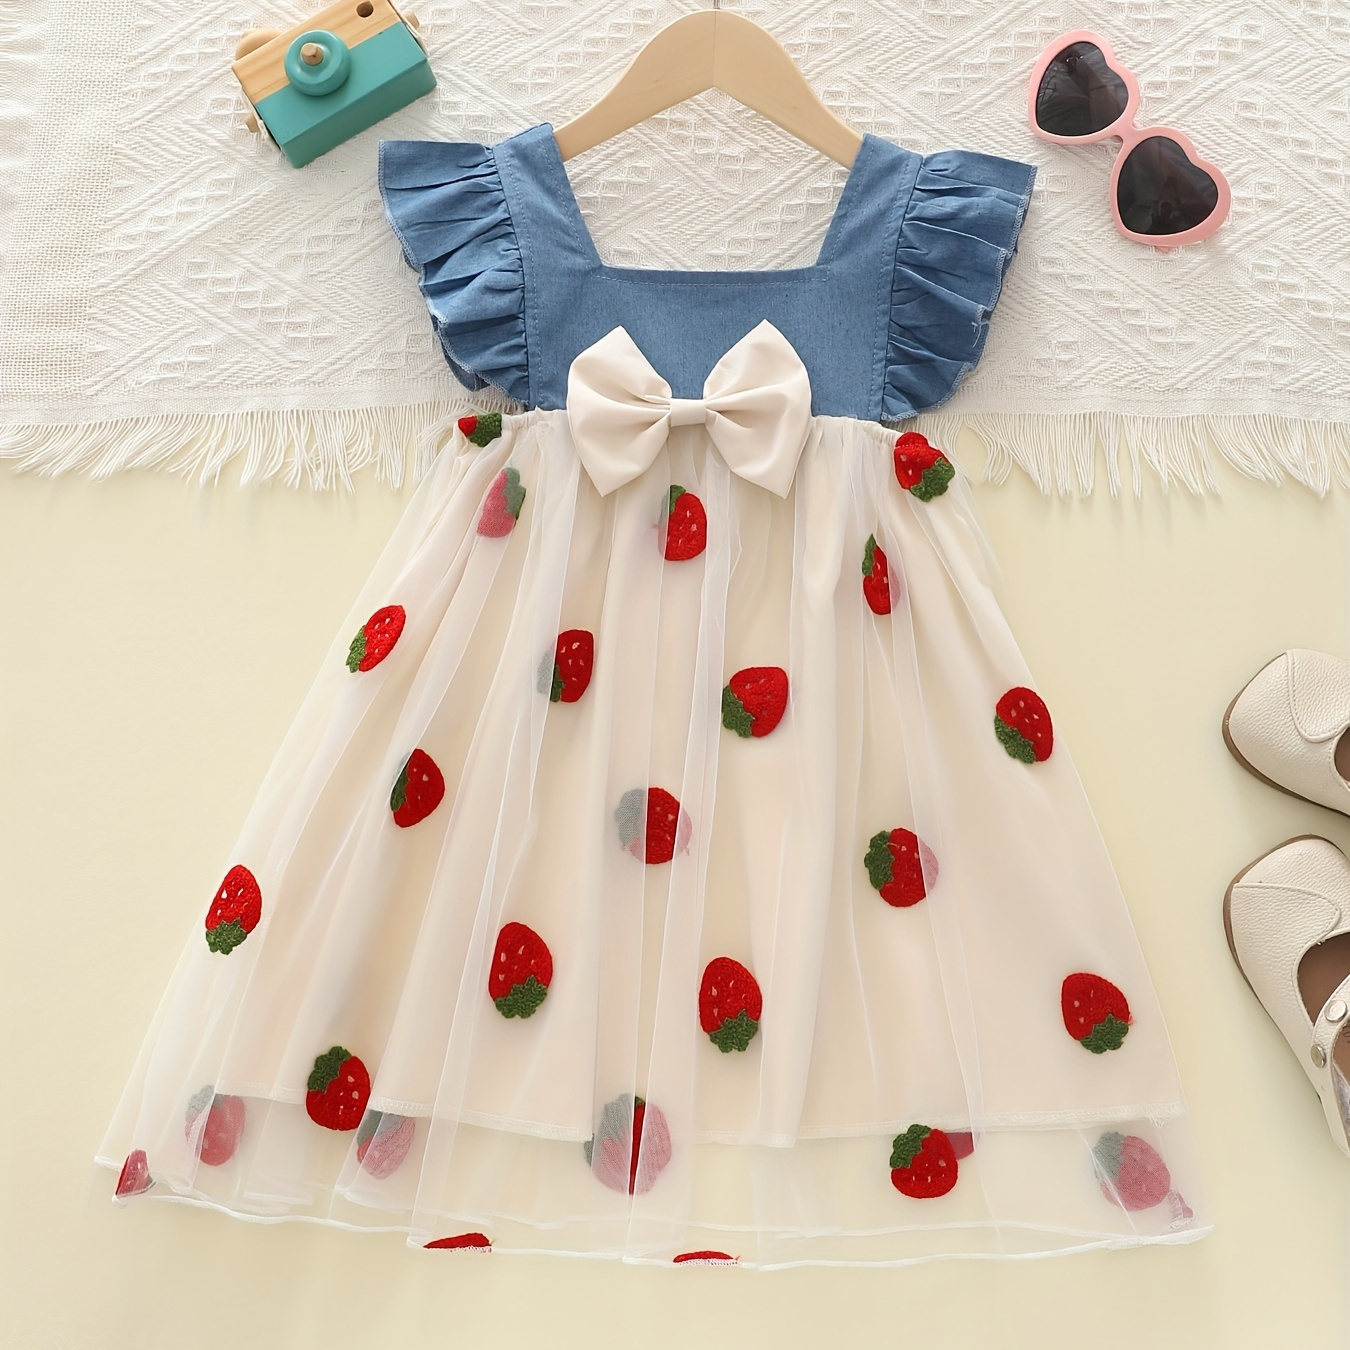 

Sweet Strawberry Mesh Stitching Gauze Dress For Girls Vacation Casual Dresses, Summer Clothing Gift